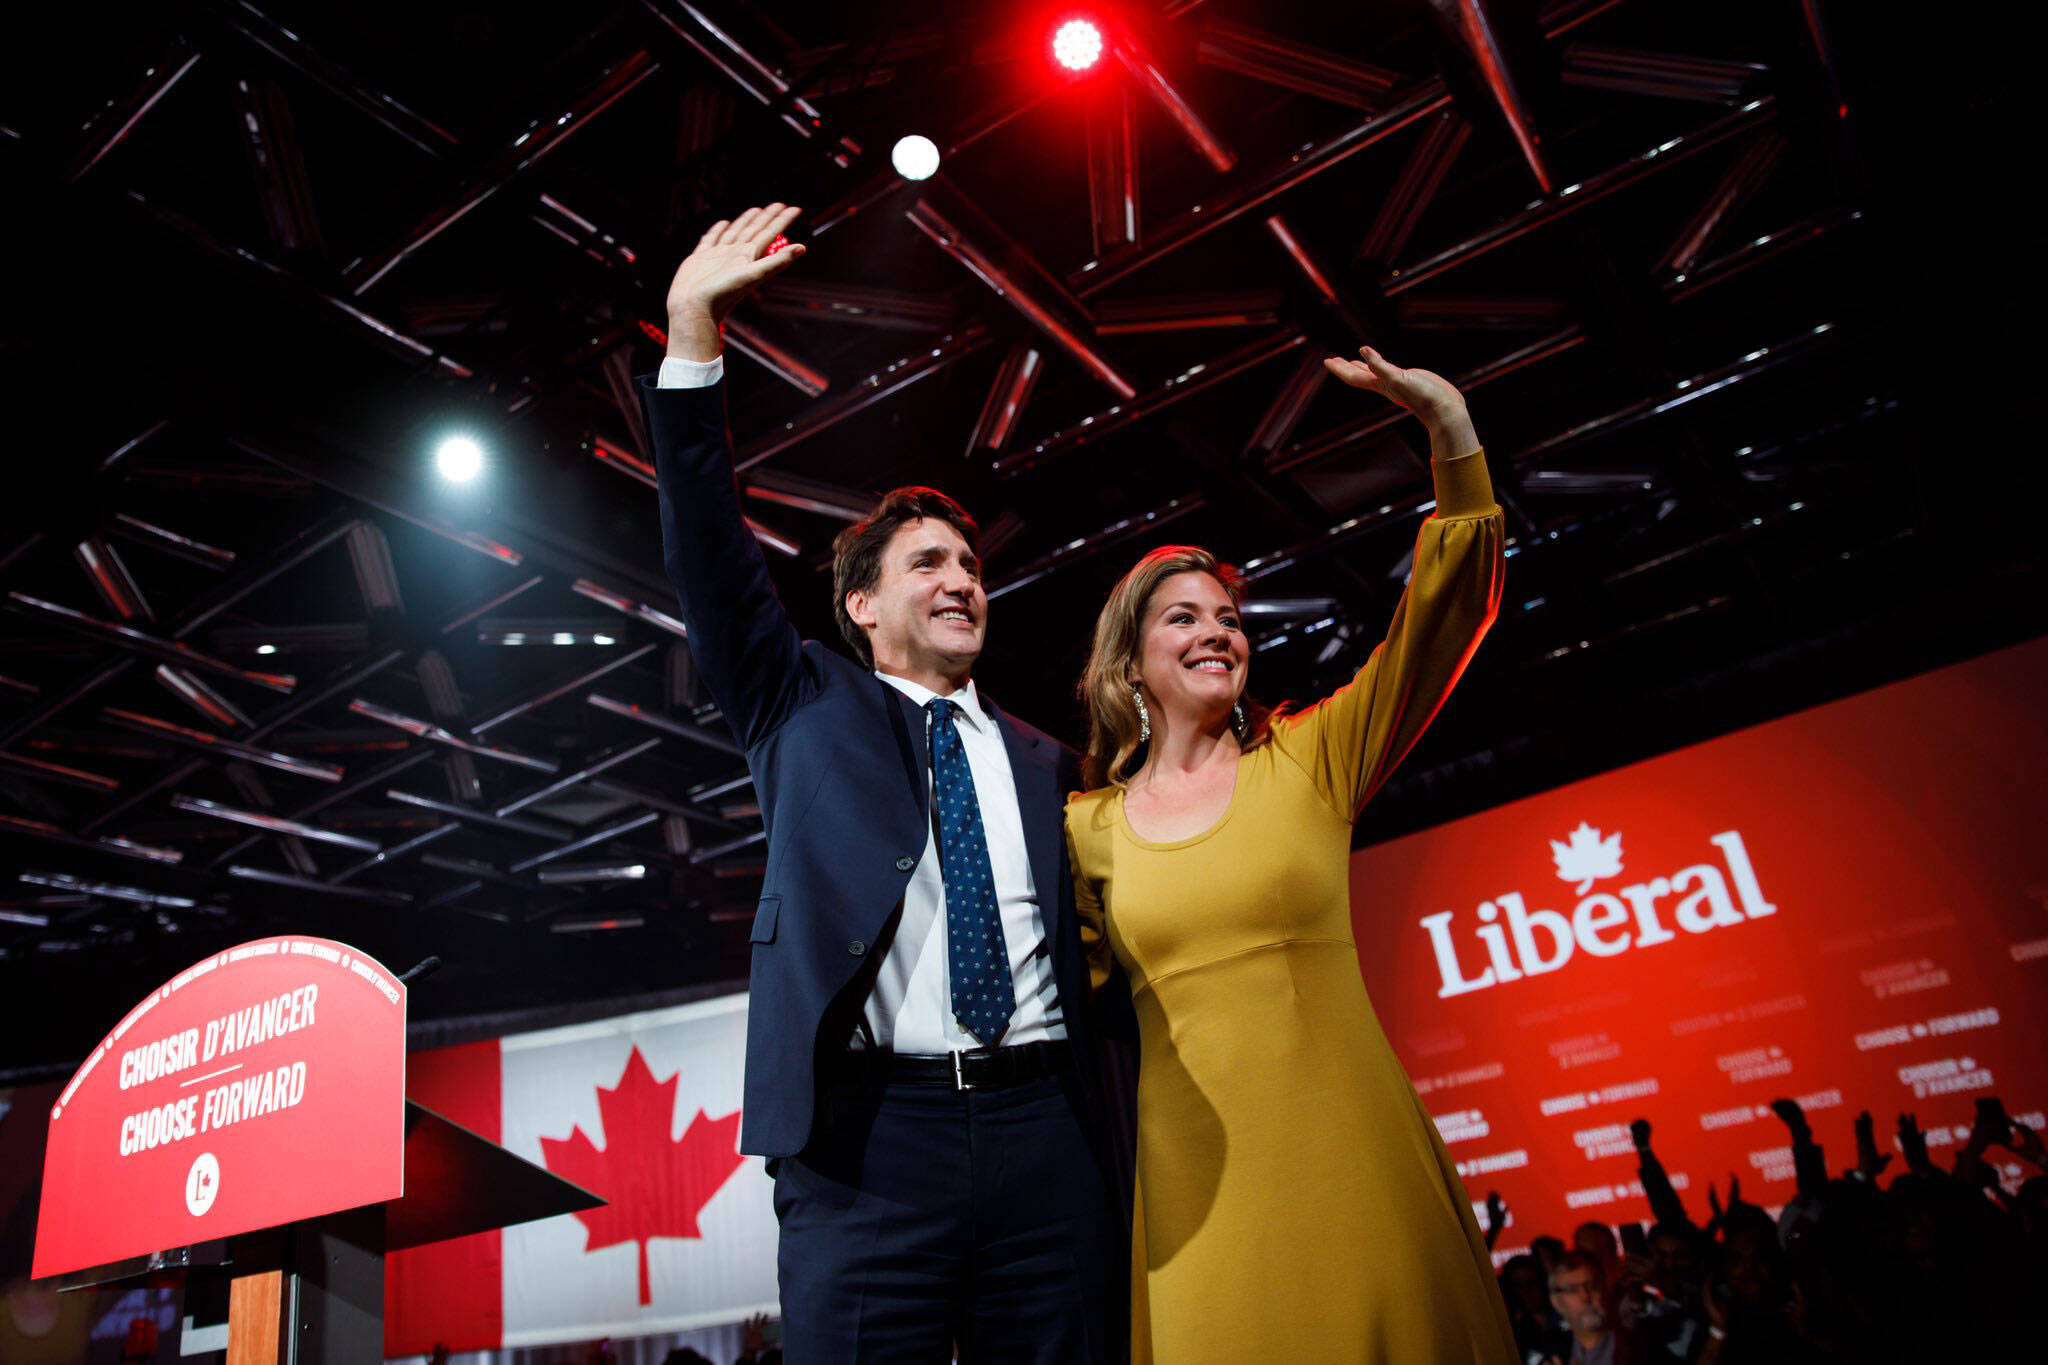 Justin Trudeau Re Elected As Prime Minister Of Canada